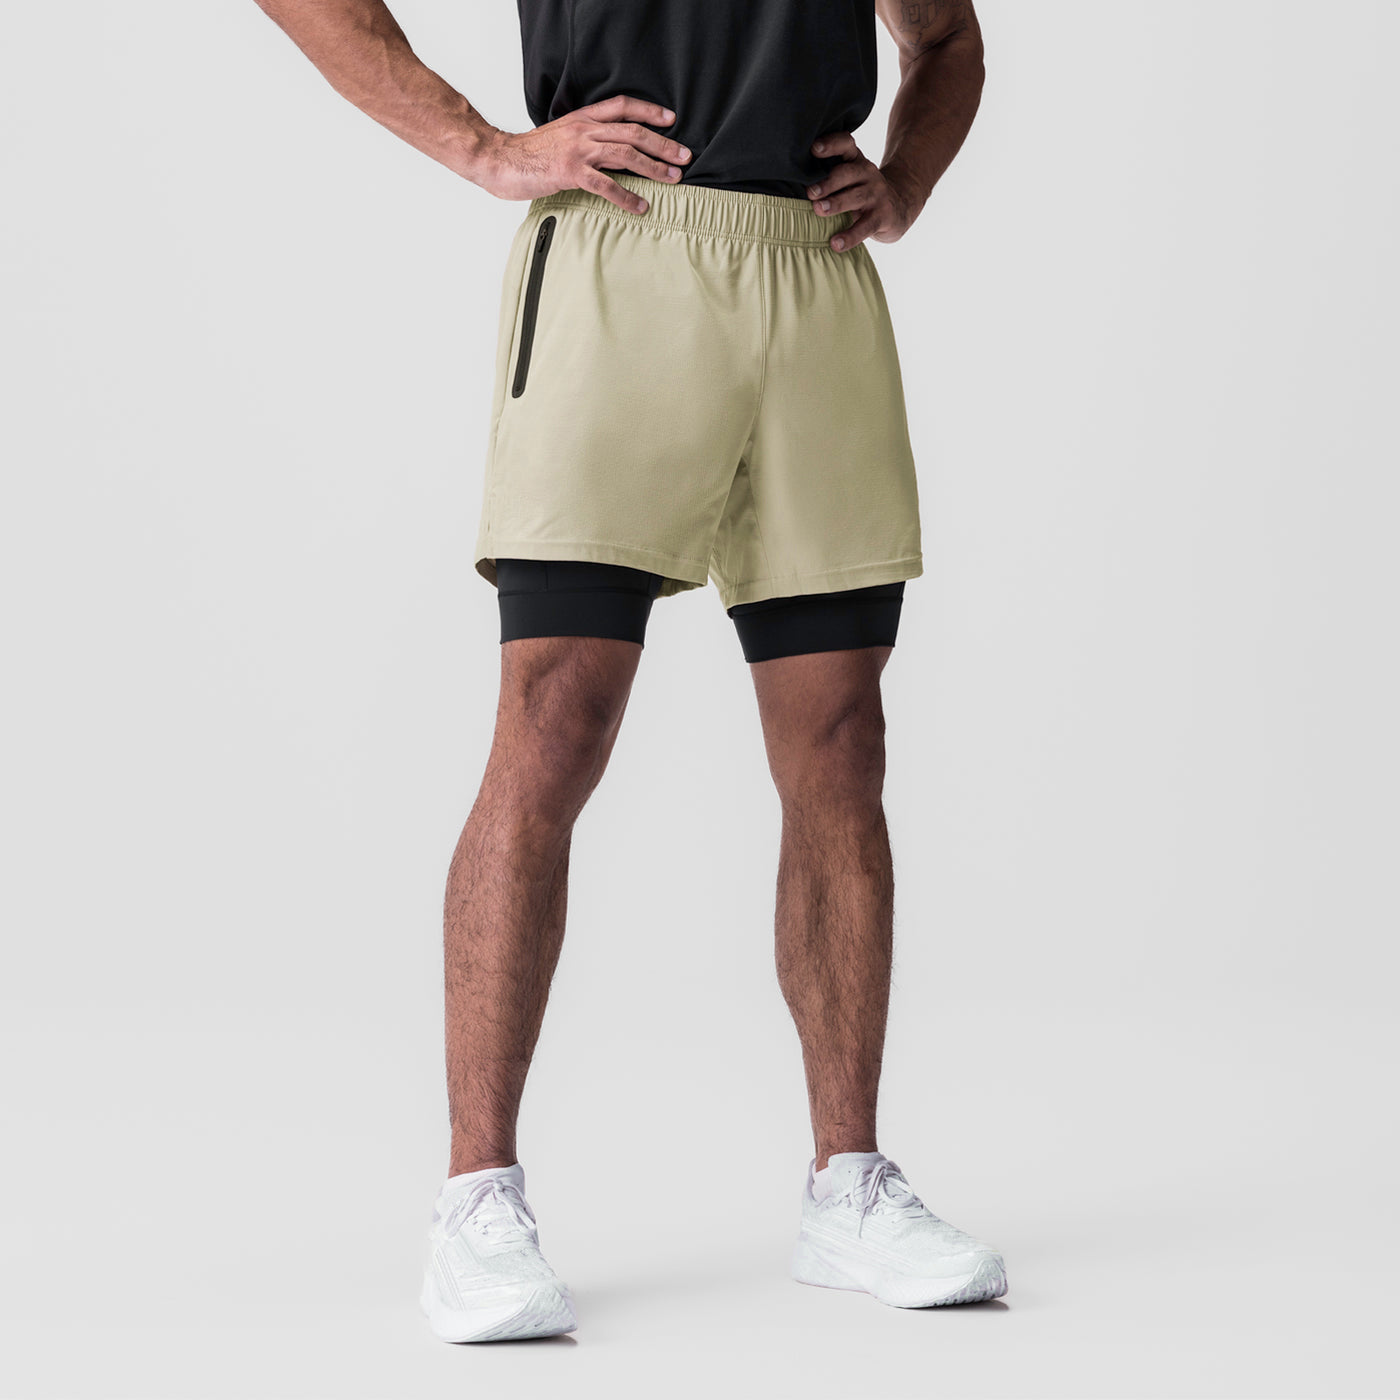 Men’s 2 in 1 Quick Dry Workout Shorts - Brown